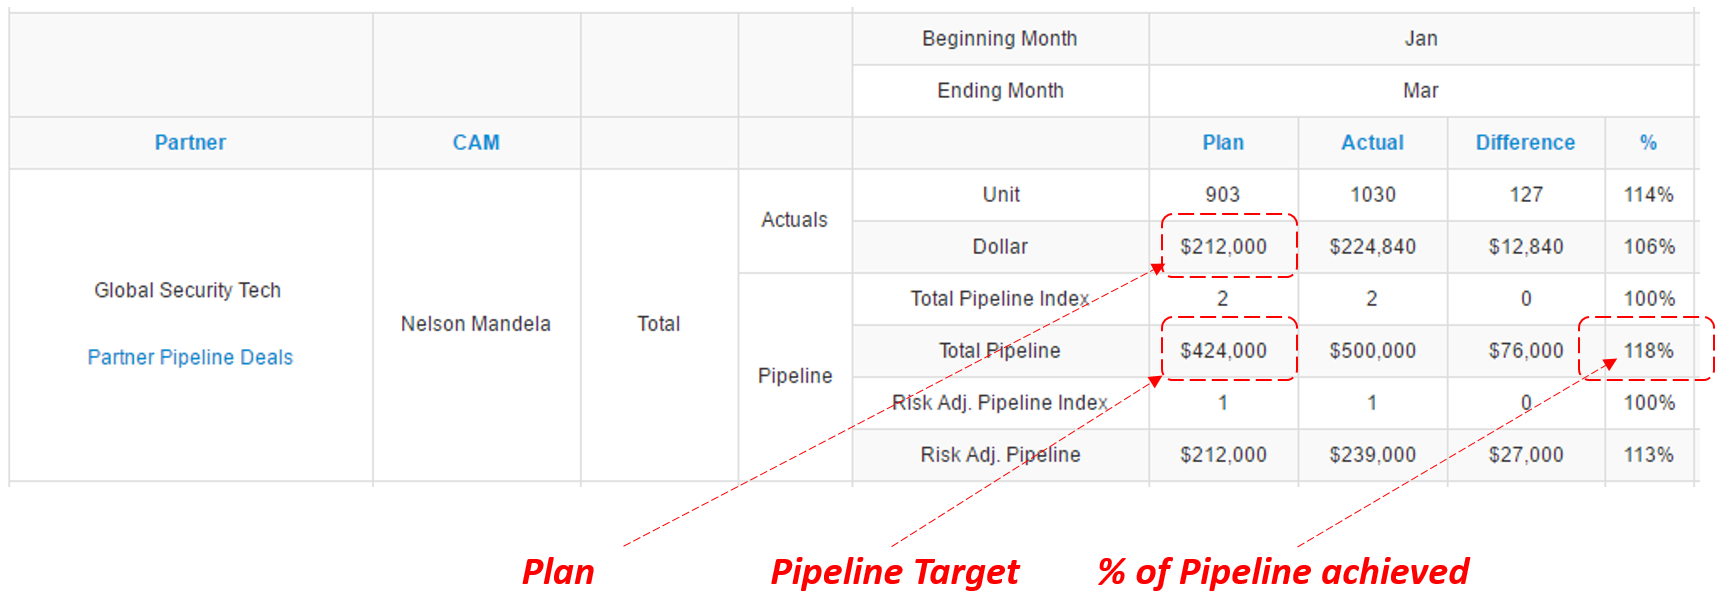 Pipeline Target and Pipeline Achieved